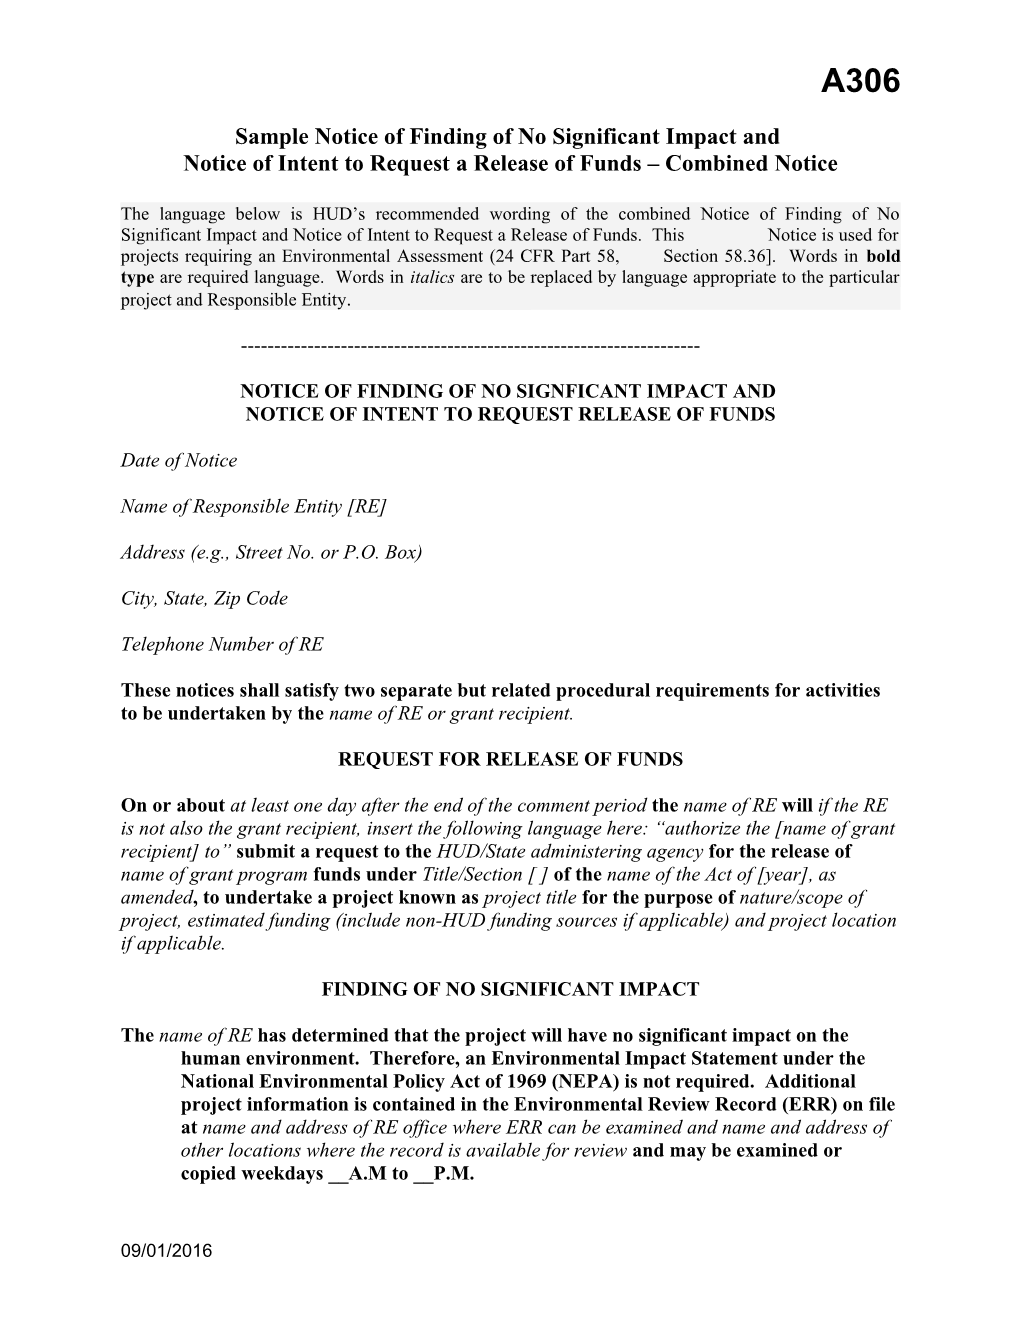 Sample Notice of Finding of No Significant Impact And